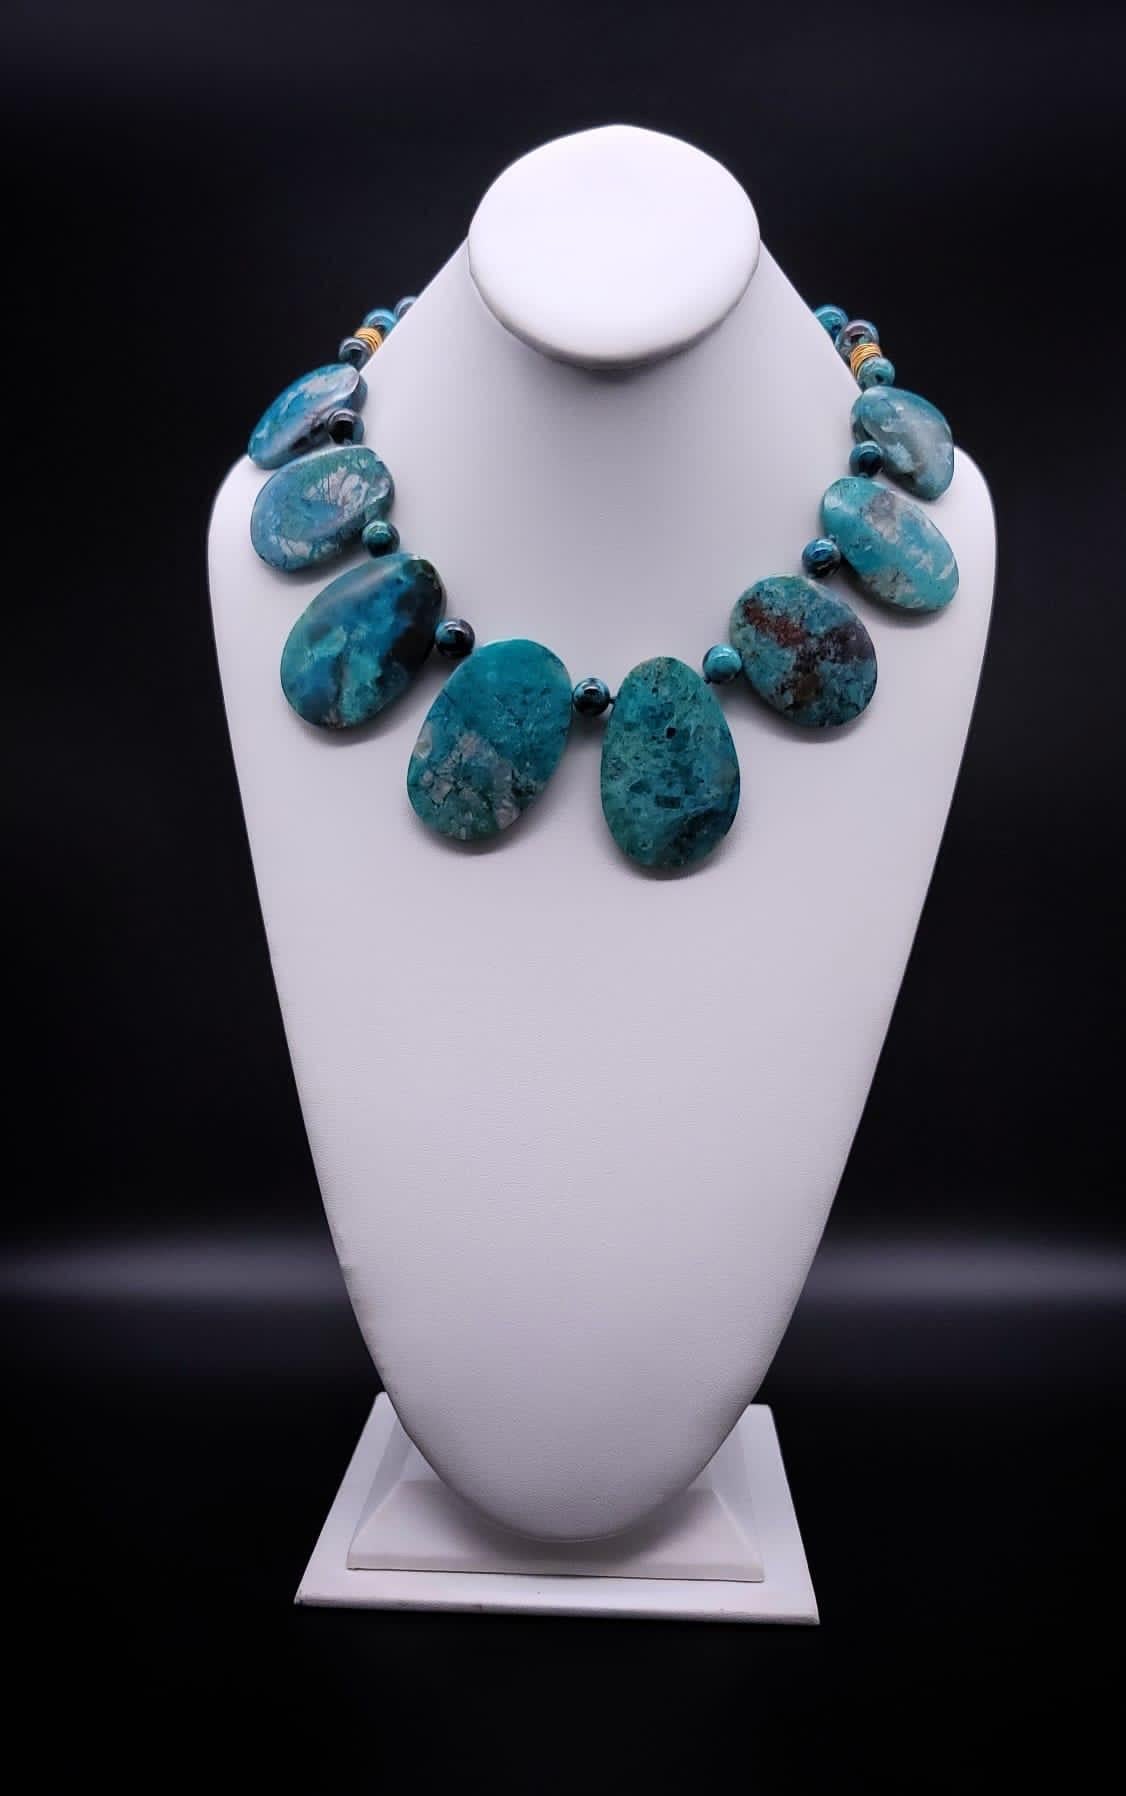 One-of-a-Kind

Powerful necklace of natural, specimen blue/green Chysacola plates. The highly polished stones are separated by 10 m.m Chysacola polished beads. Flat stones set this piece apart from the convention of big statement necklaces. This